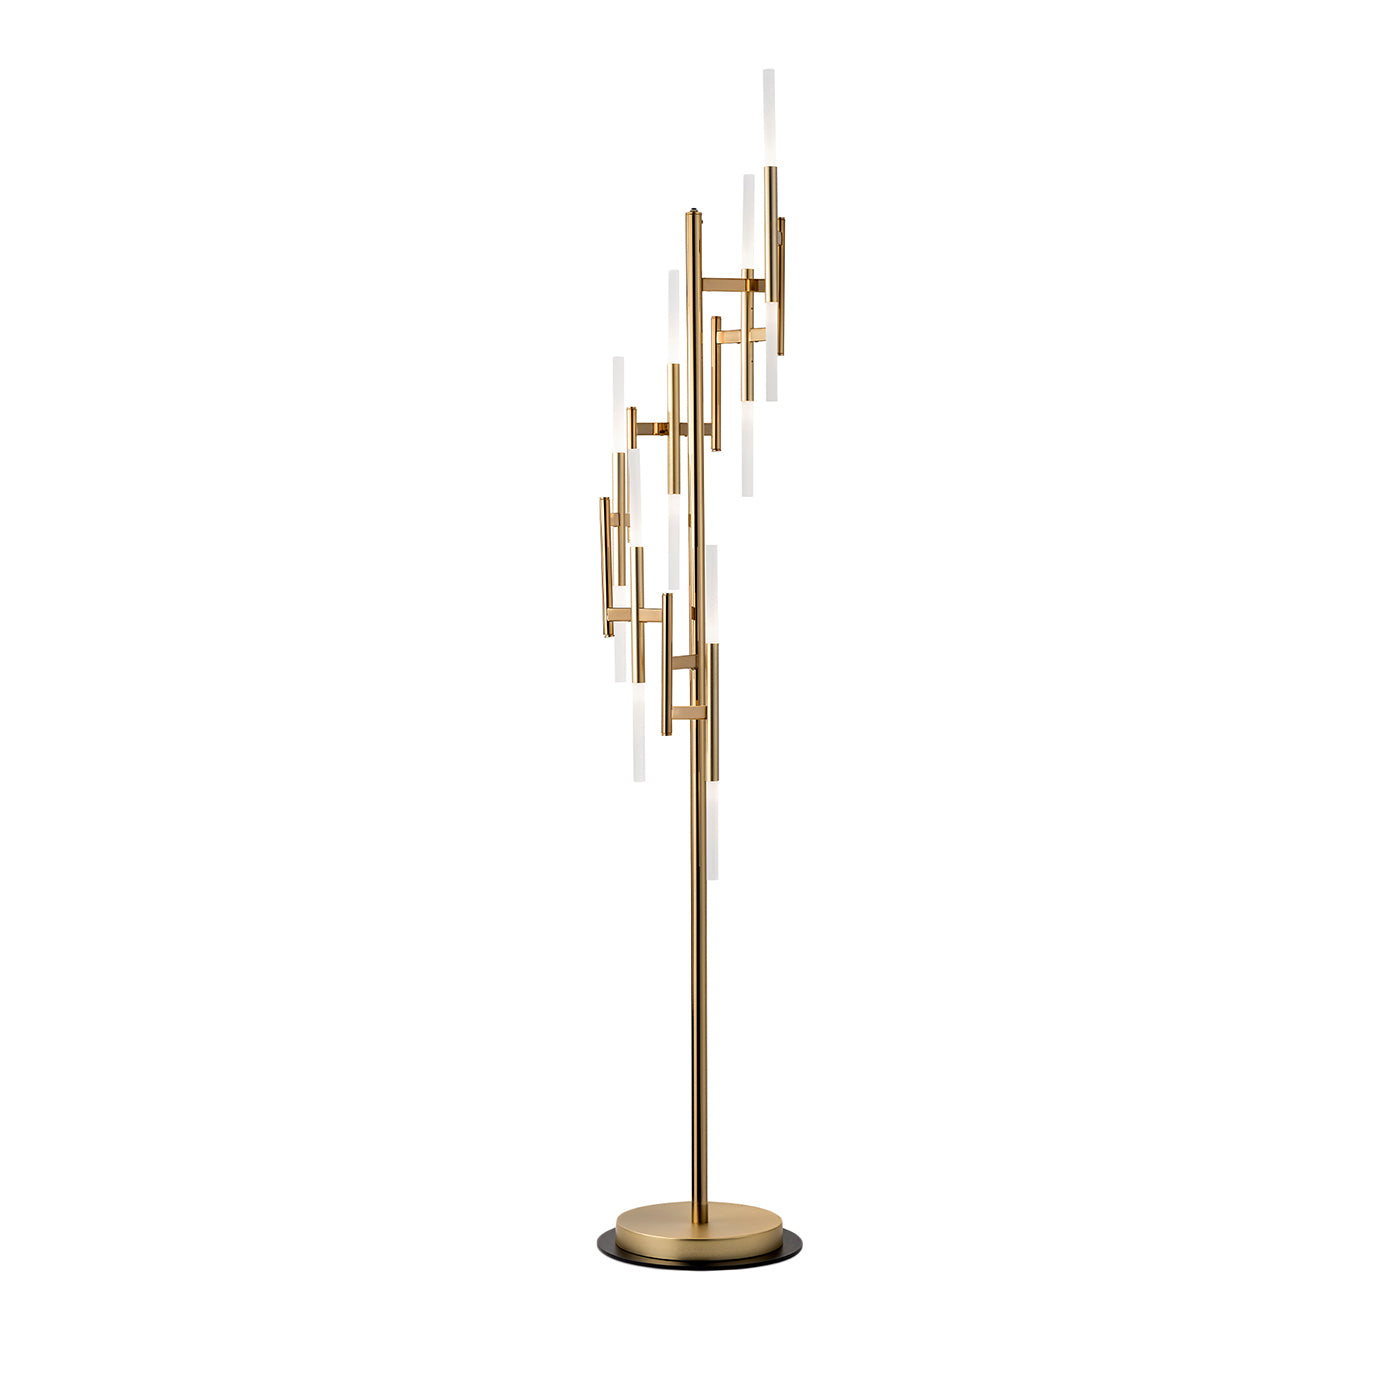 12-Light Ekle Floor Lamp in Brushed Gold with Bronze Accents - Main view